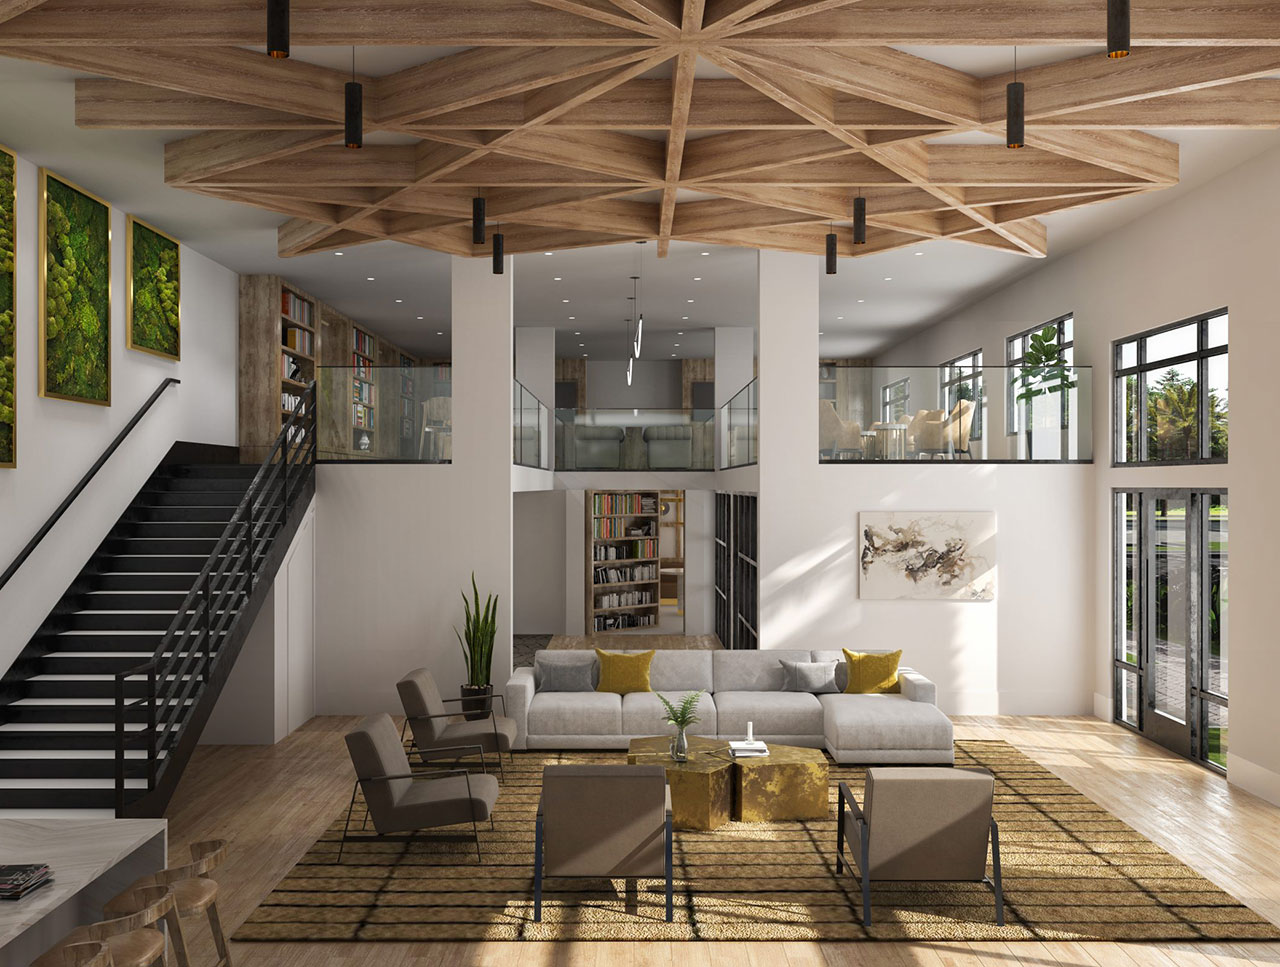 Double-story lounge area in a modern apartment complex featuring stylish furniture and decor.